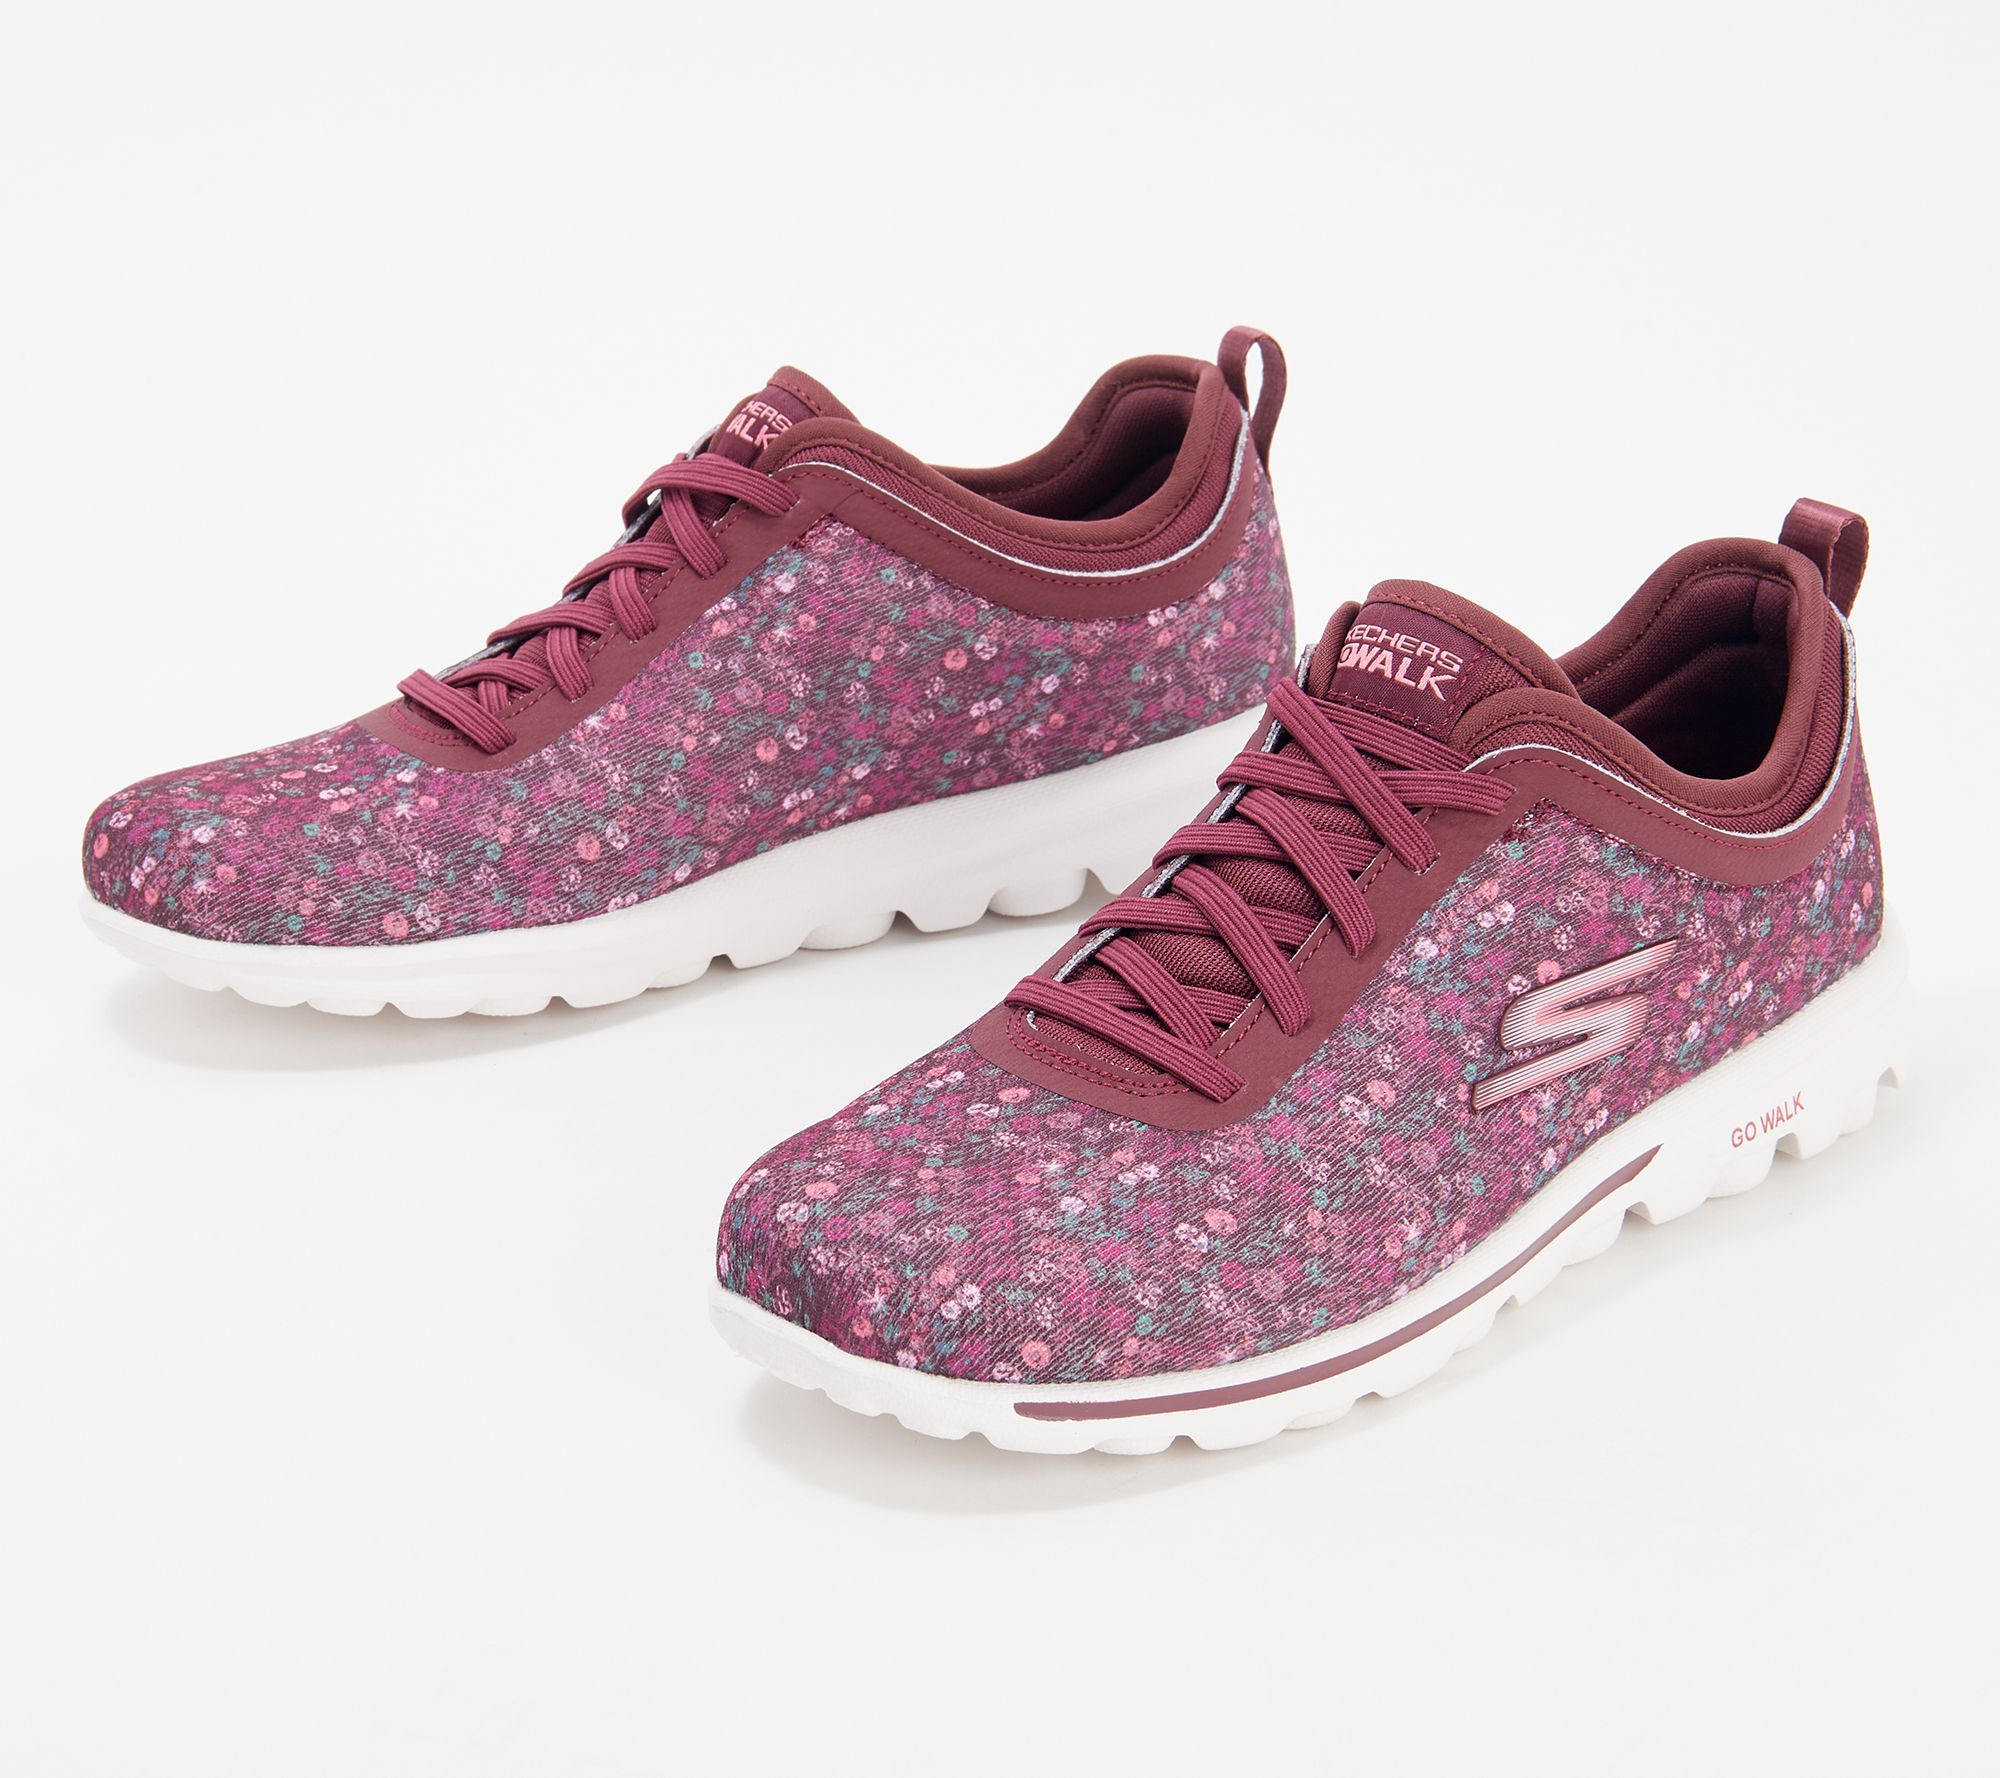 Skechers GOwalk Washable Floral Sneakers - Blooming Rose - QVC.com